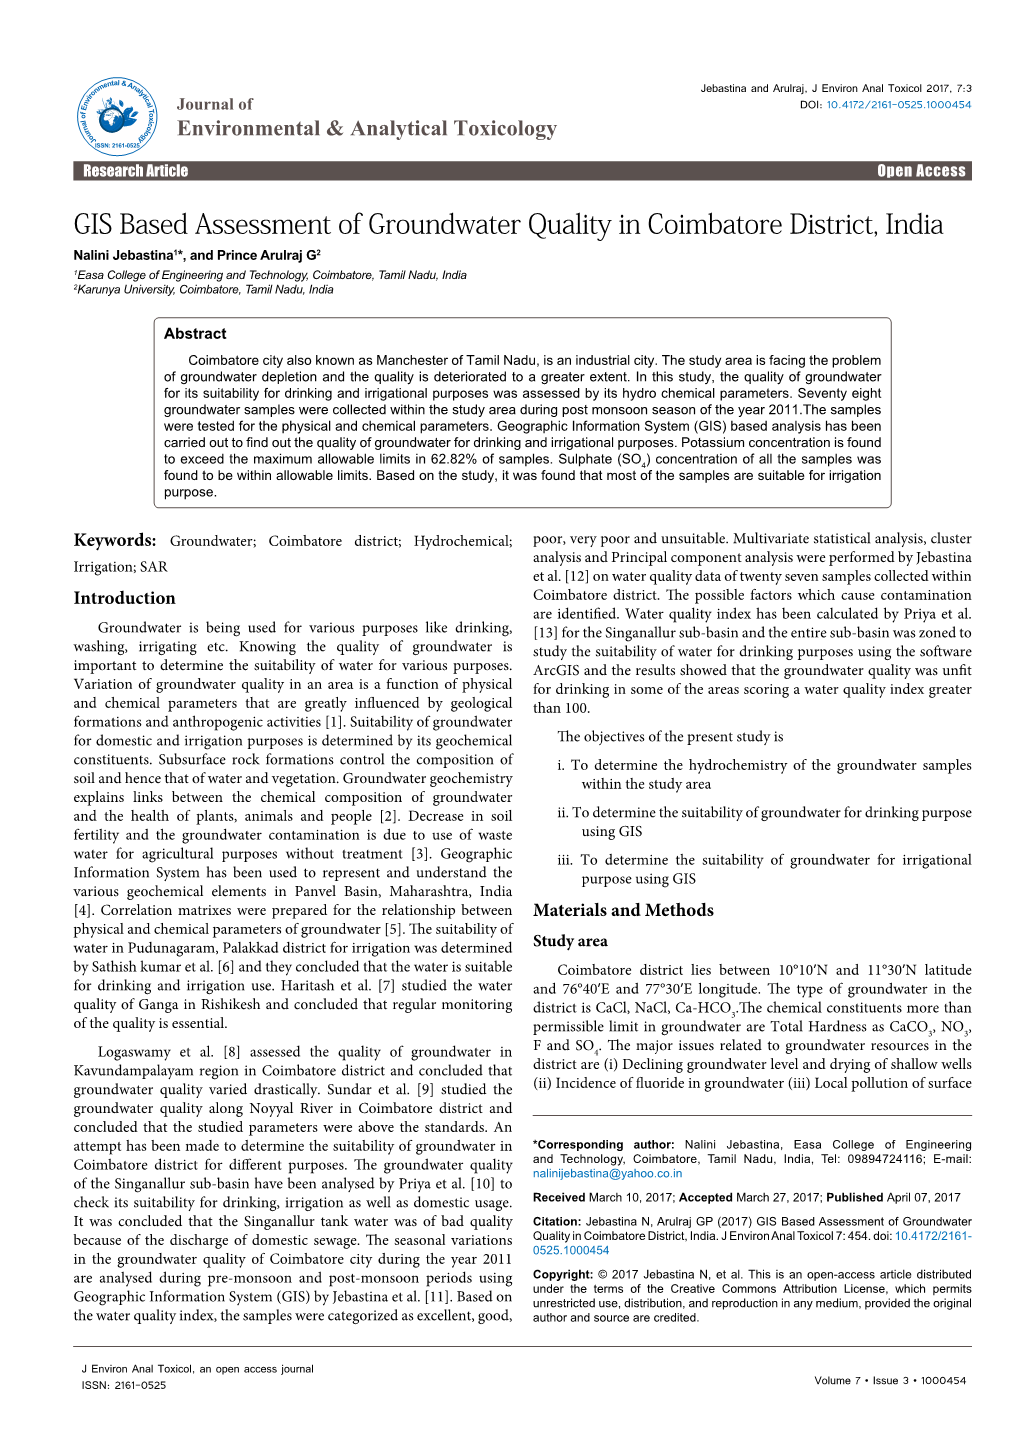 GIS Based Assessment of Groundwater Quality in Coimbatore